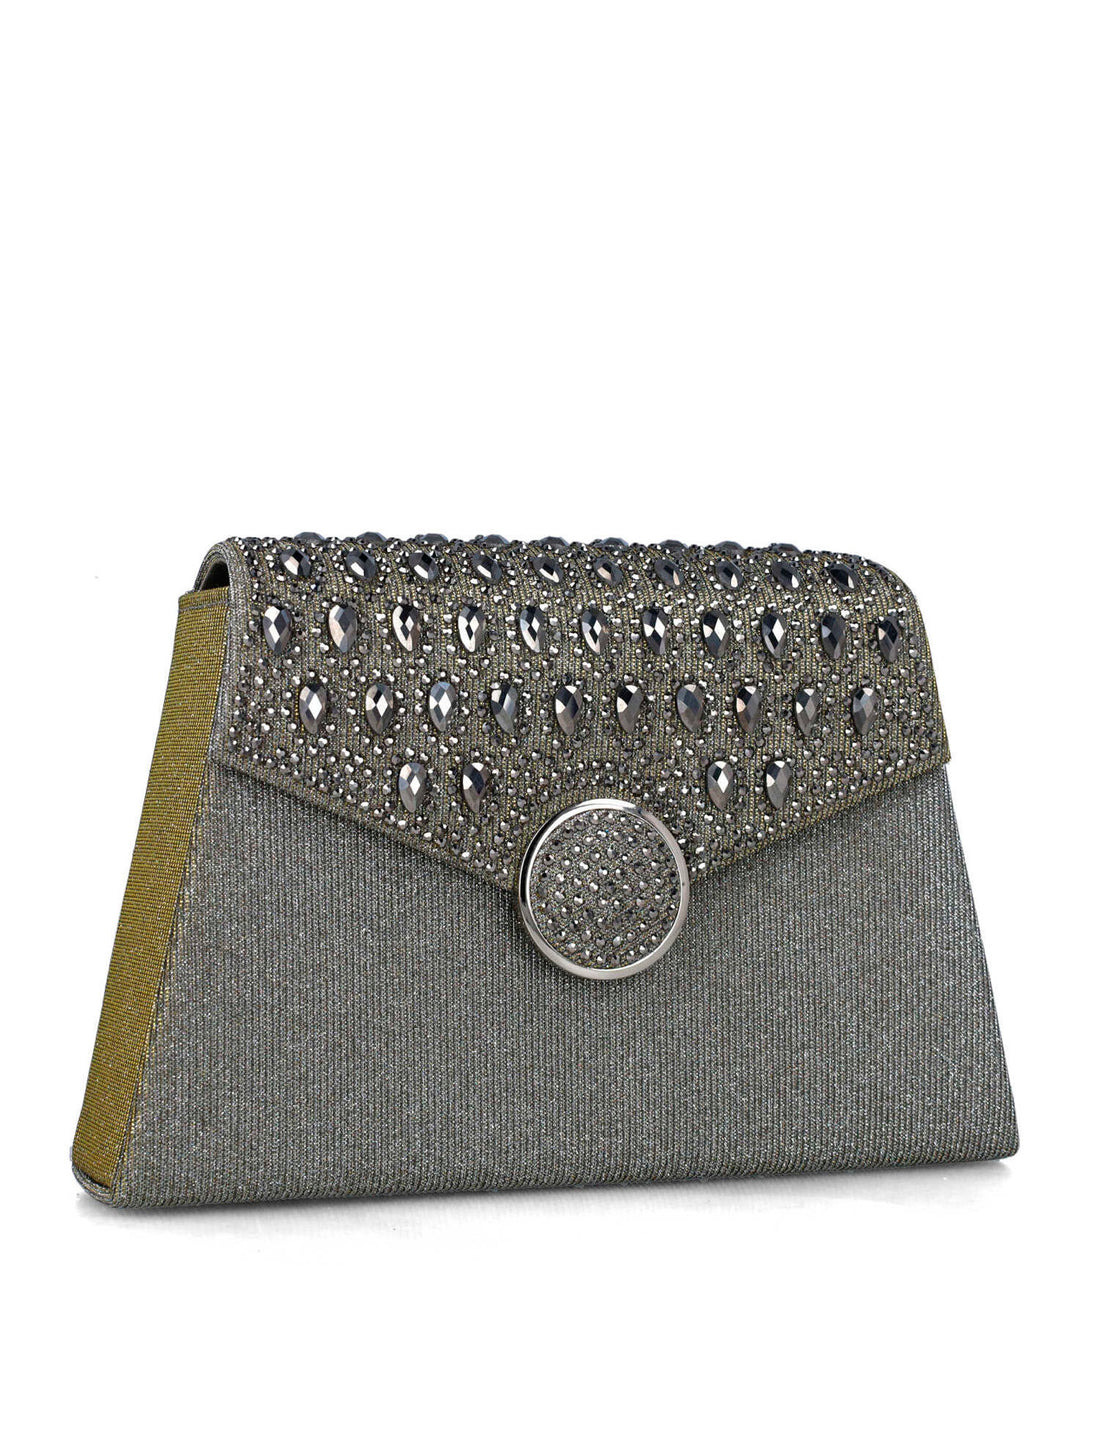 Grey Clutch With Embellished Flap_85636_71_02